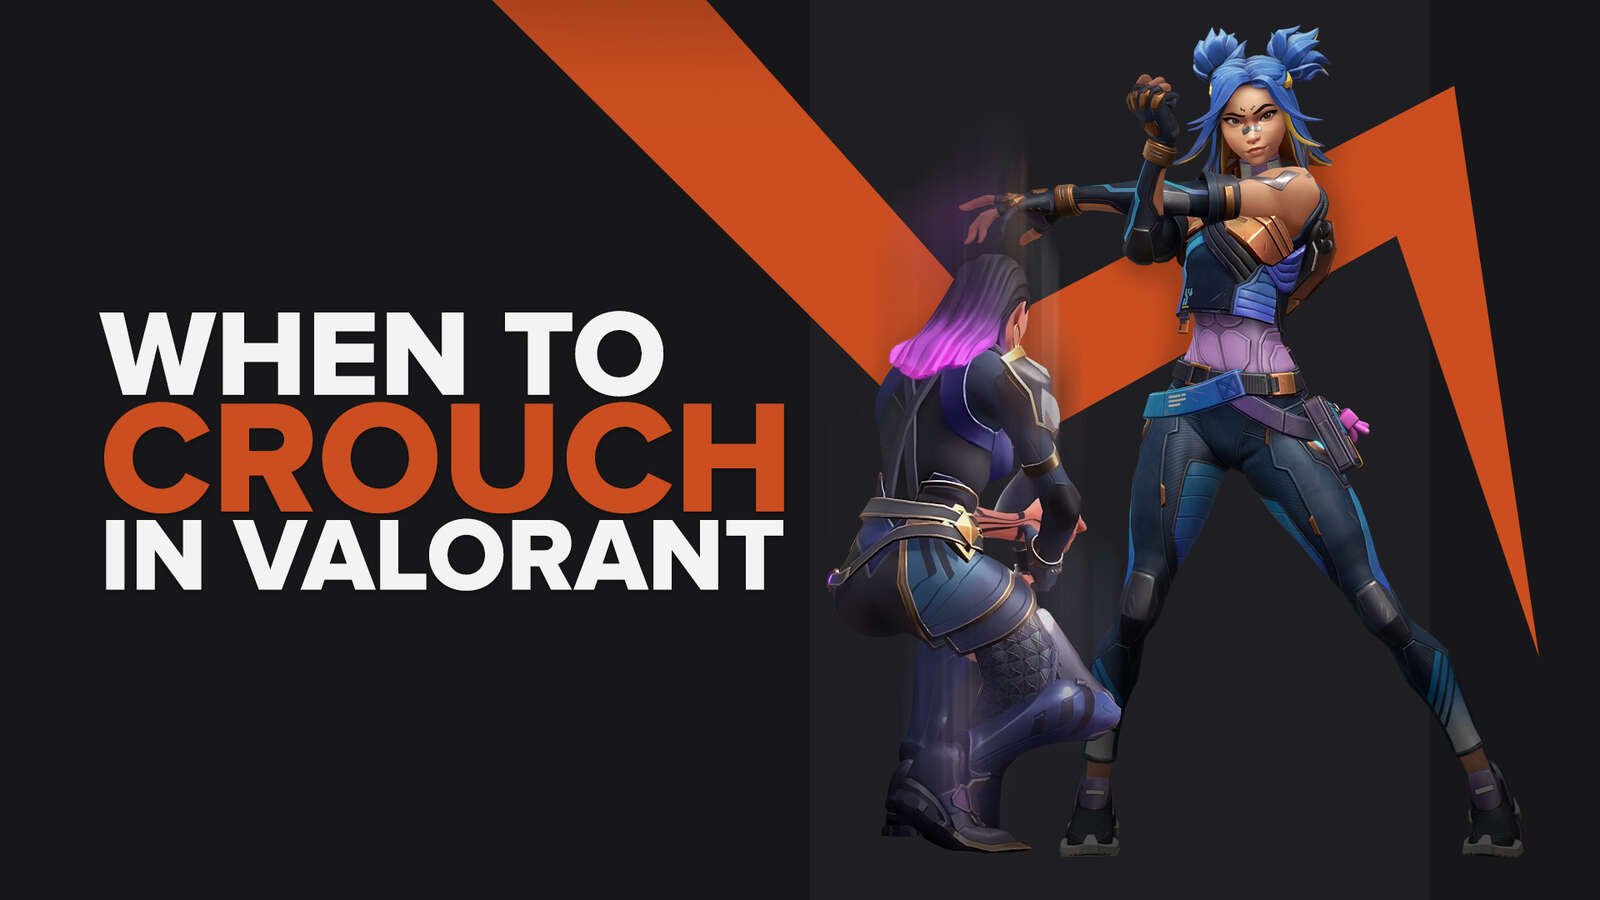 When to crouch in Valorant